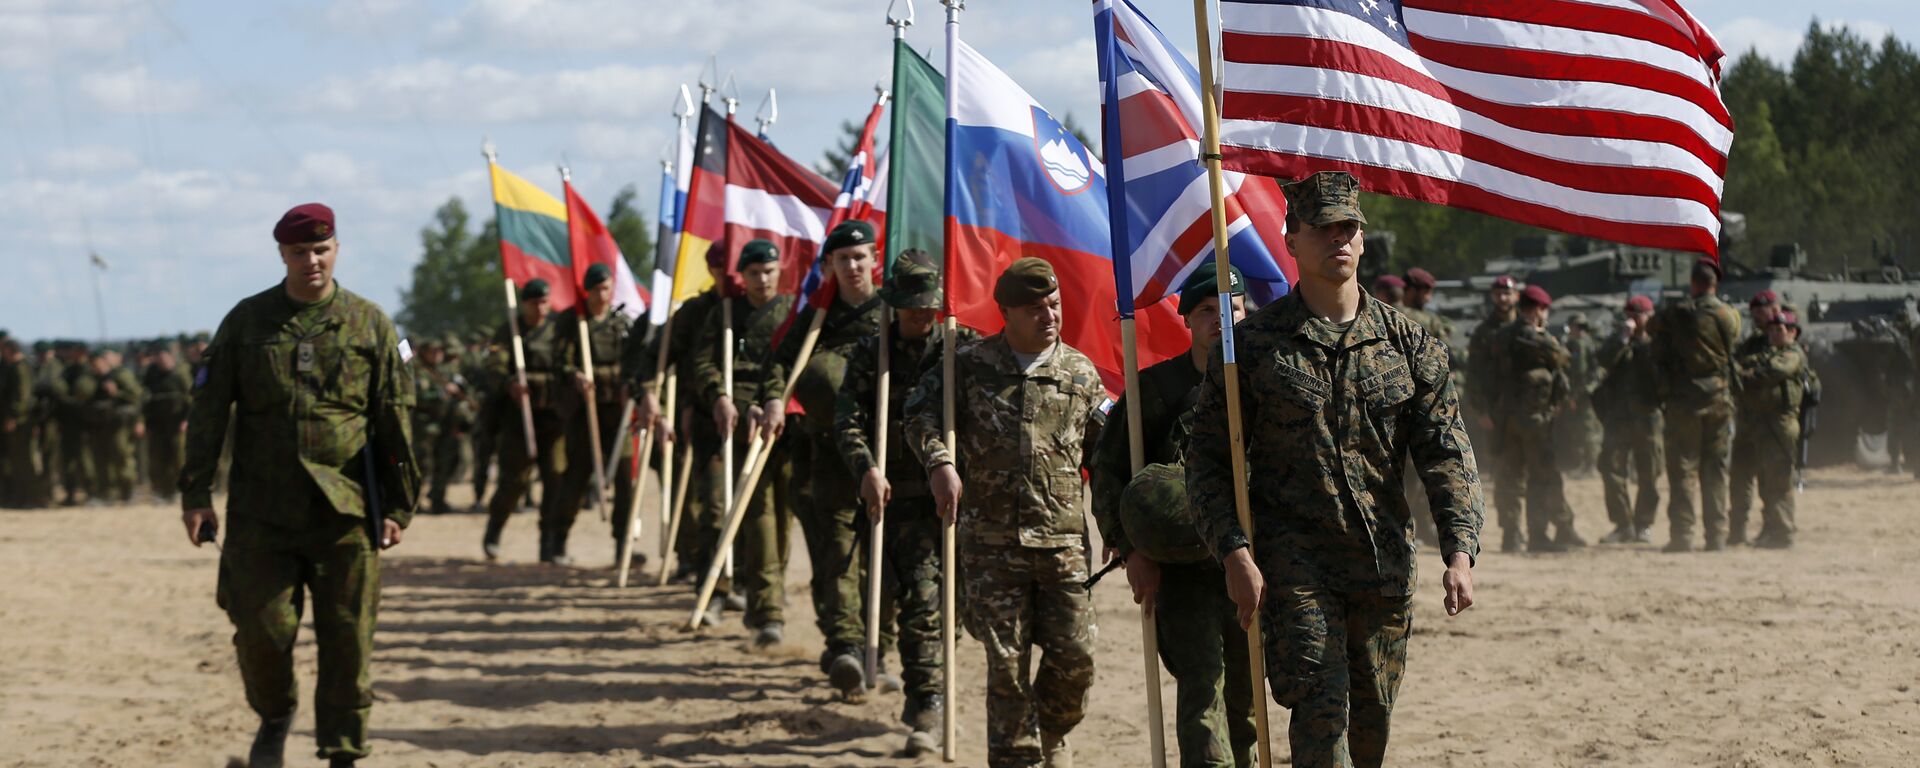 Soldiers from NATO countries attend an opening ceremony of military exercise 'Saber Strike 2015', at the Gaiziunu Training Range in Pabrade some 60km.(38 miles) north of the capital Vilnius, Lithuania, Monday, June 8, 2015 - Sputnik International, 1920, 26.02.2022